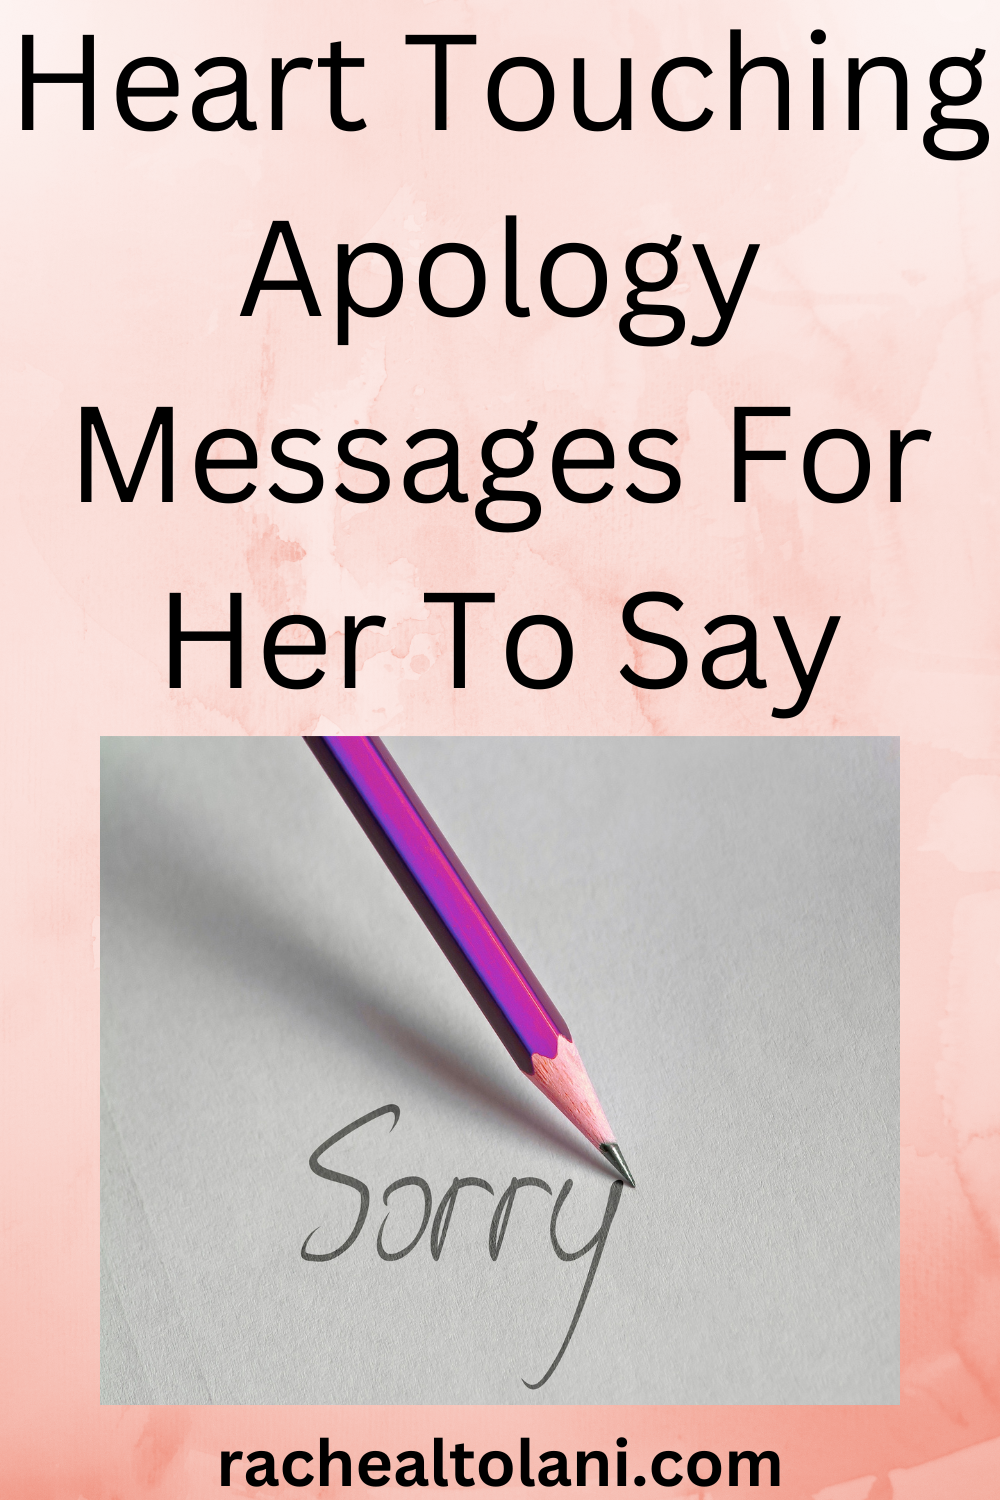 Heart touching apology messages for her